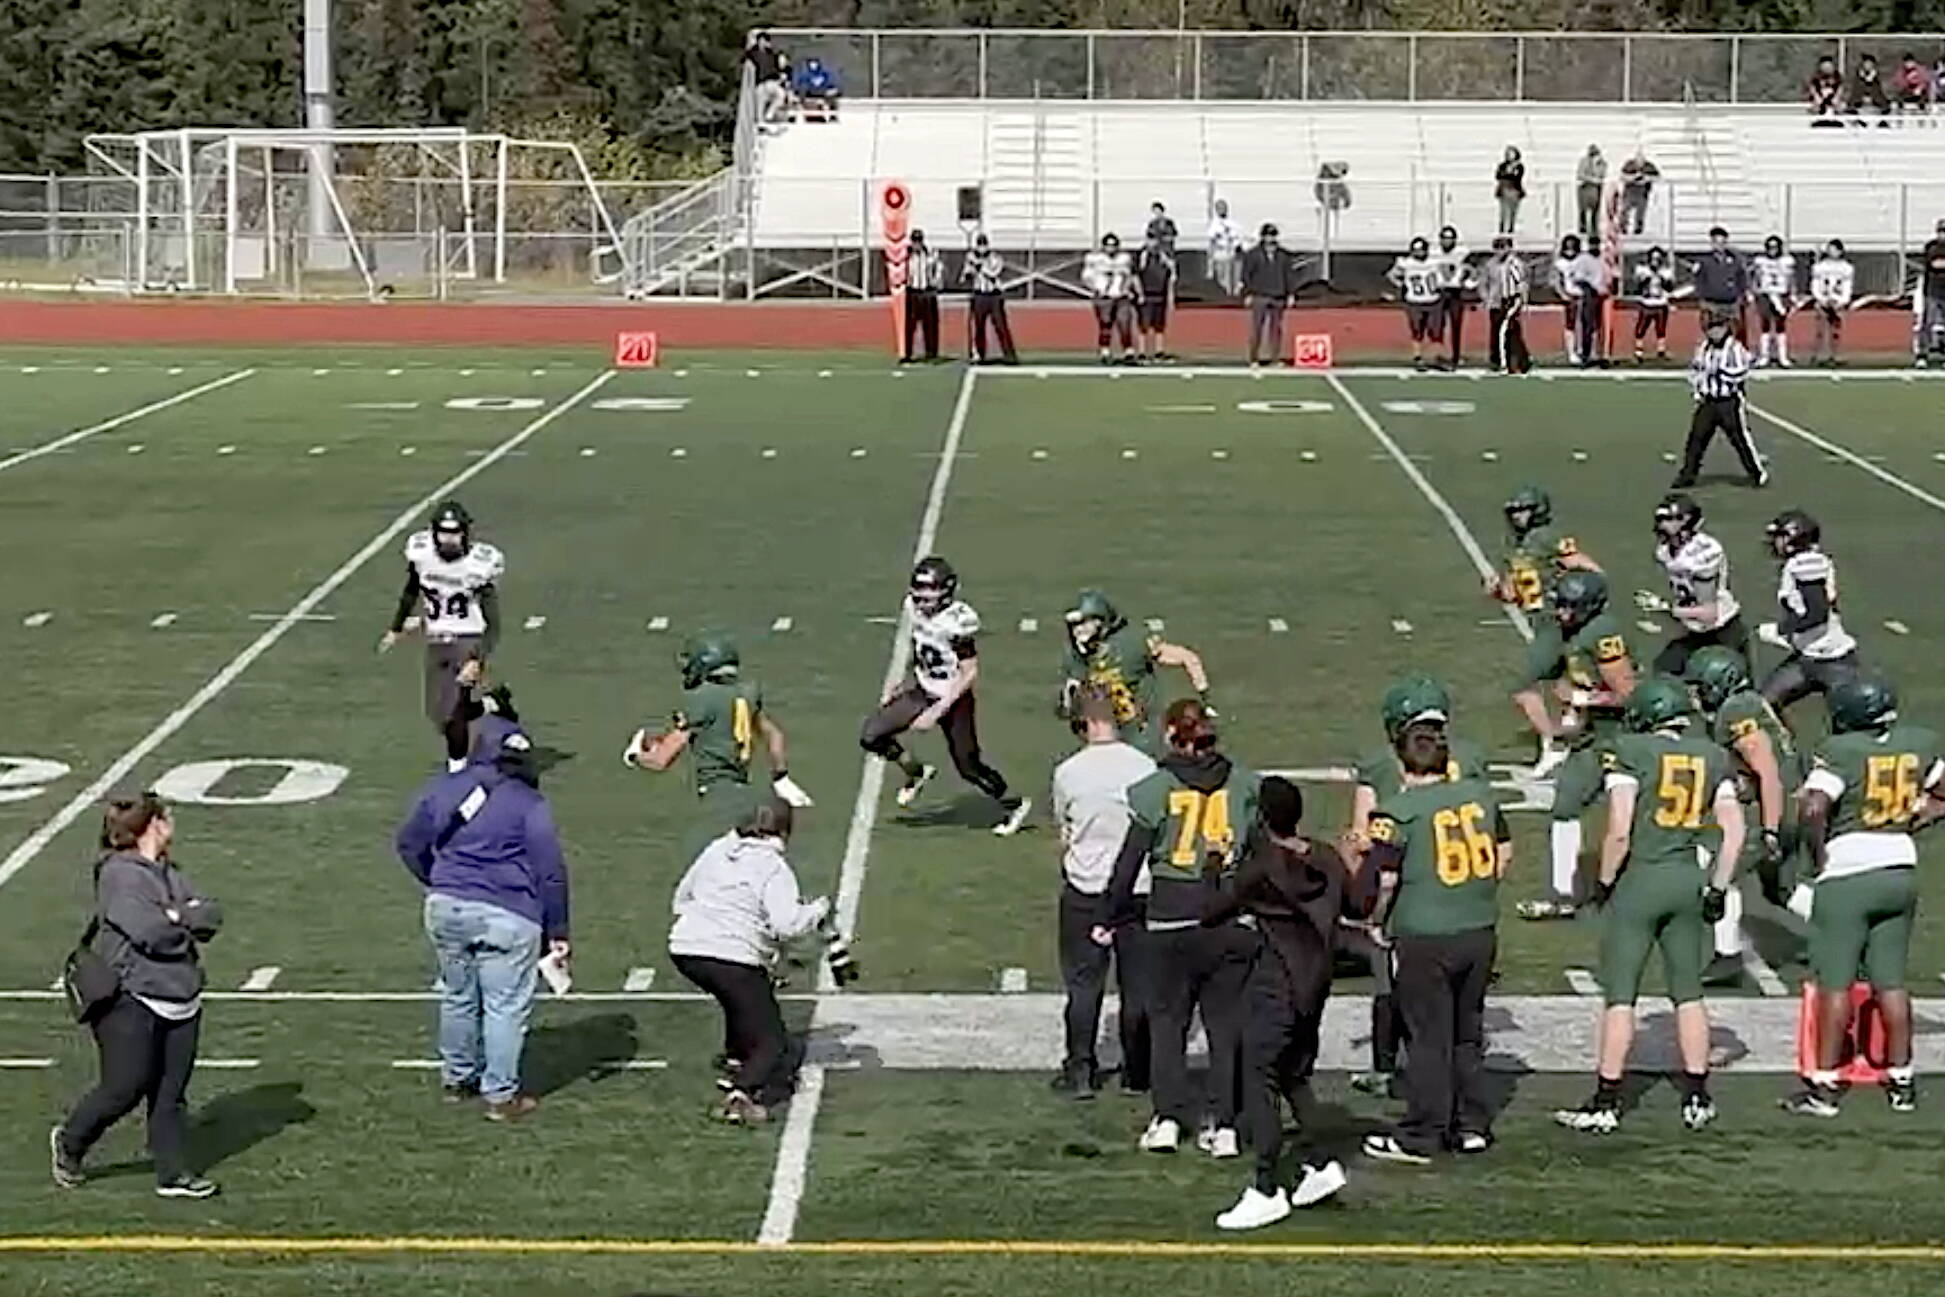 A Service High School player returns a punt deep into Juneau territory during the first quarter of Saturday’s game on the Anchorages school’s home field. Service scored its second touchdown a short time later to take a 15-0 lead before going on to win 54-14. (Courtesy of Juneau Huskies Football)